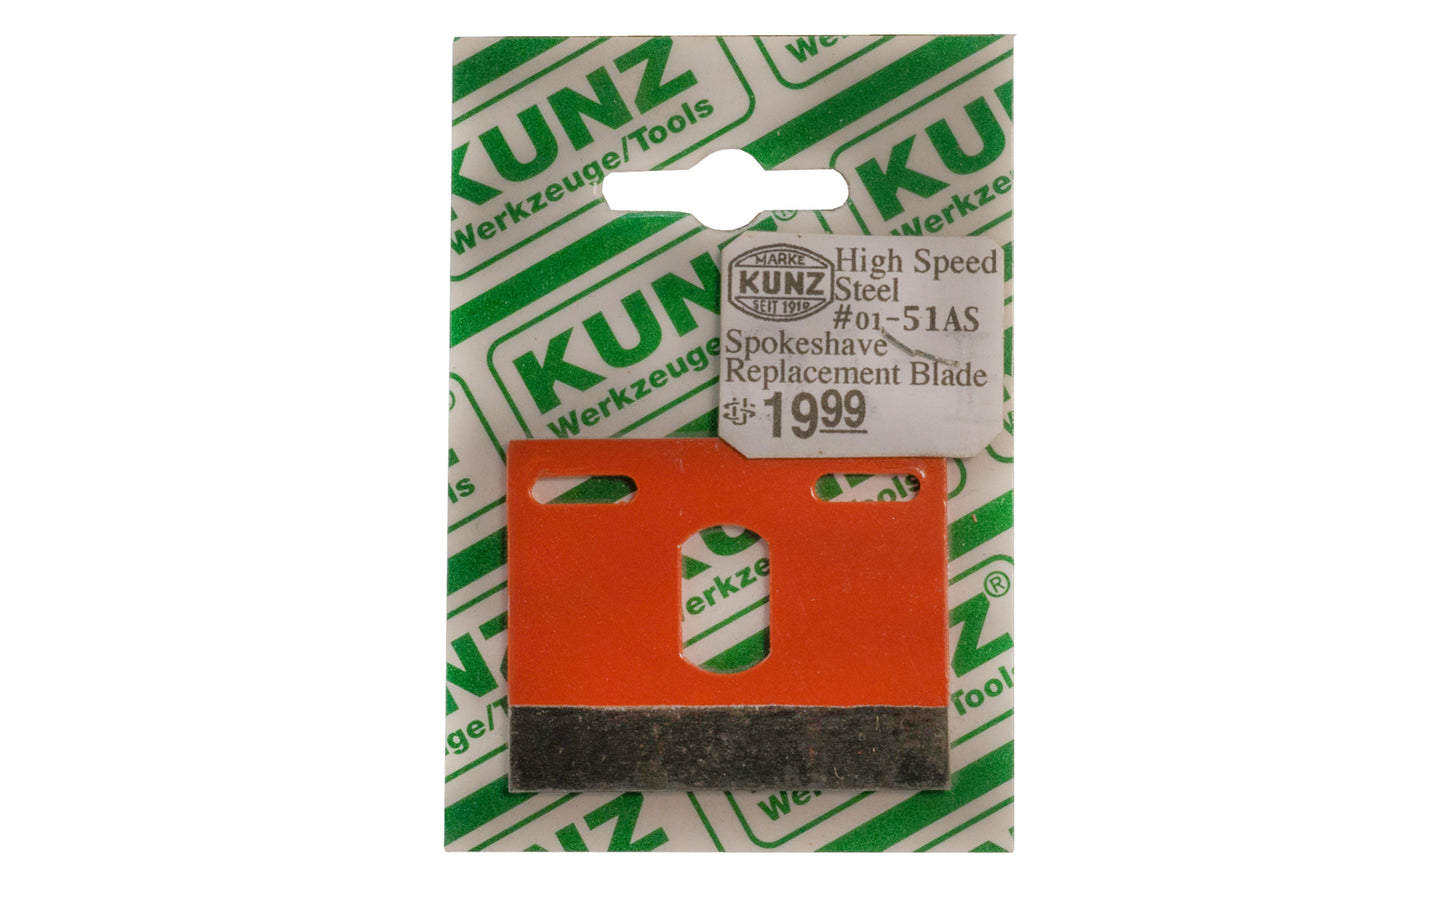 Kunz HSS Replacement Blade for Spokeshave made by Kunz Tools in Germany. 2" wide straight cutter blade. Honing is recommended before use. ~ Kunz Model 01-51AS ~ Made in Germany